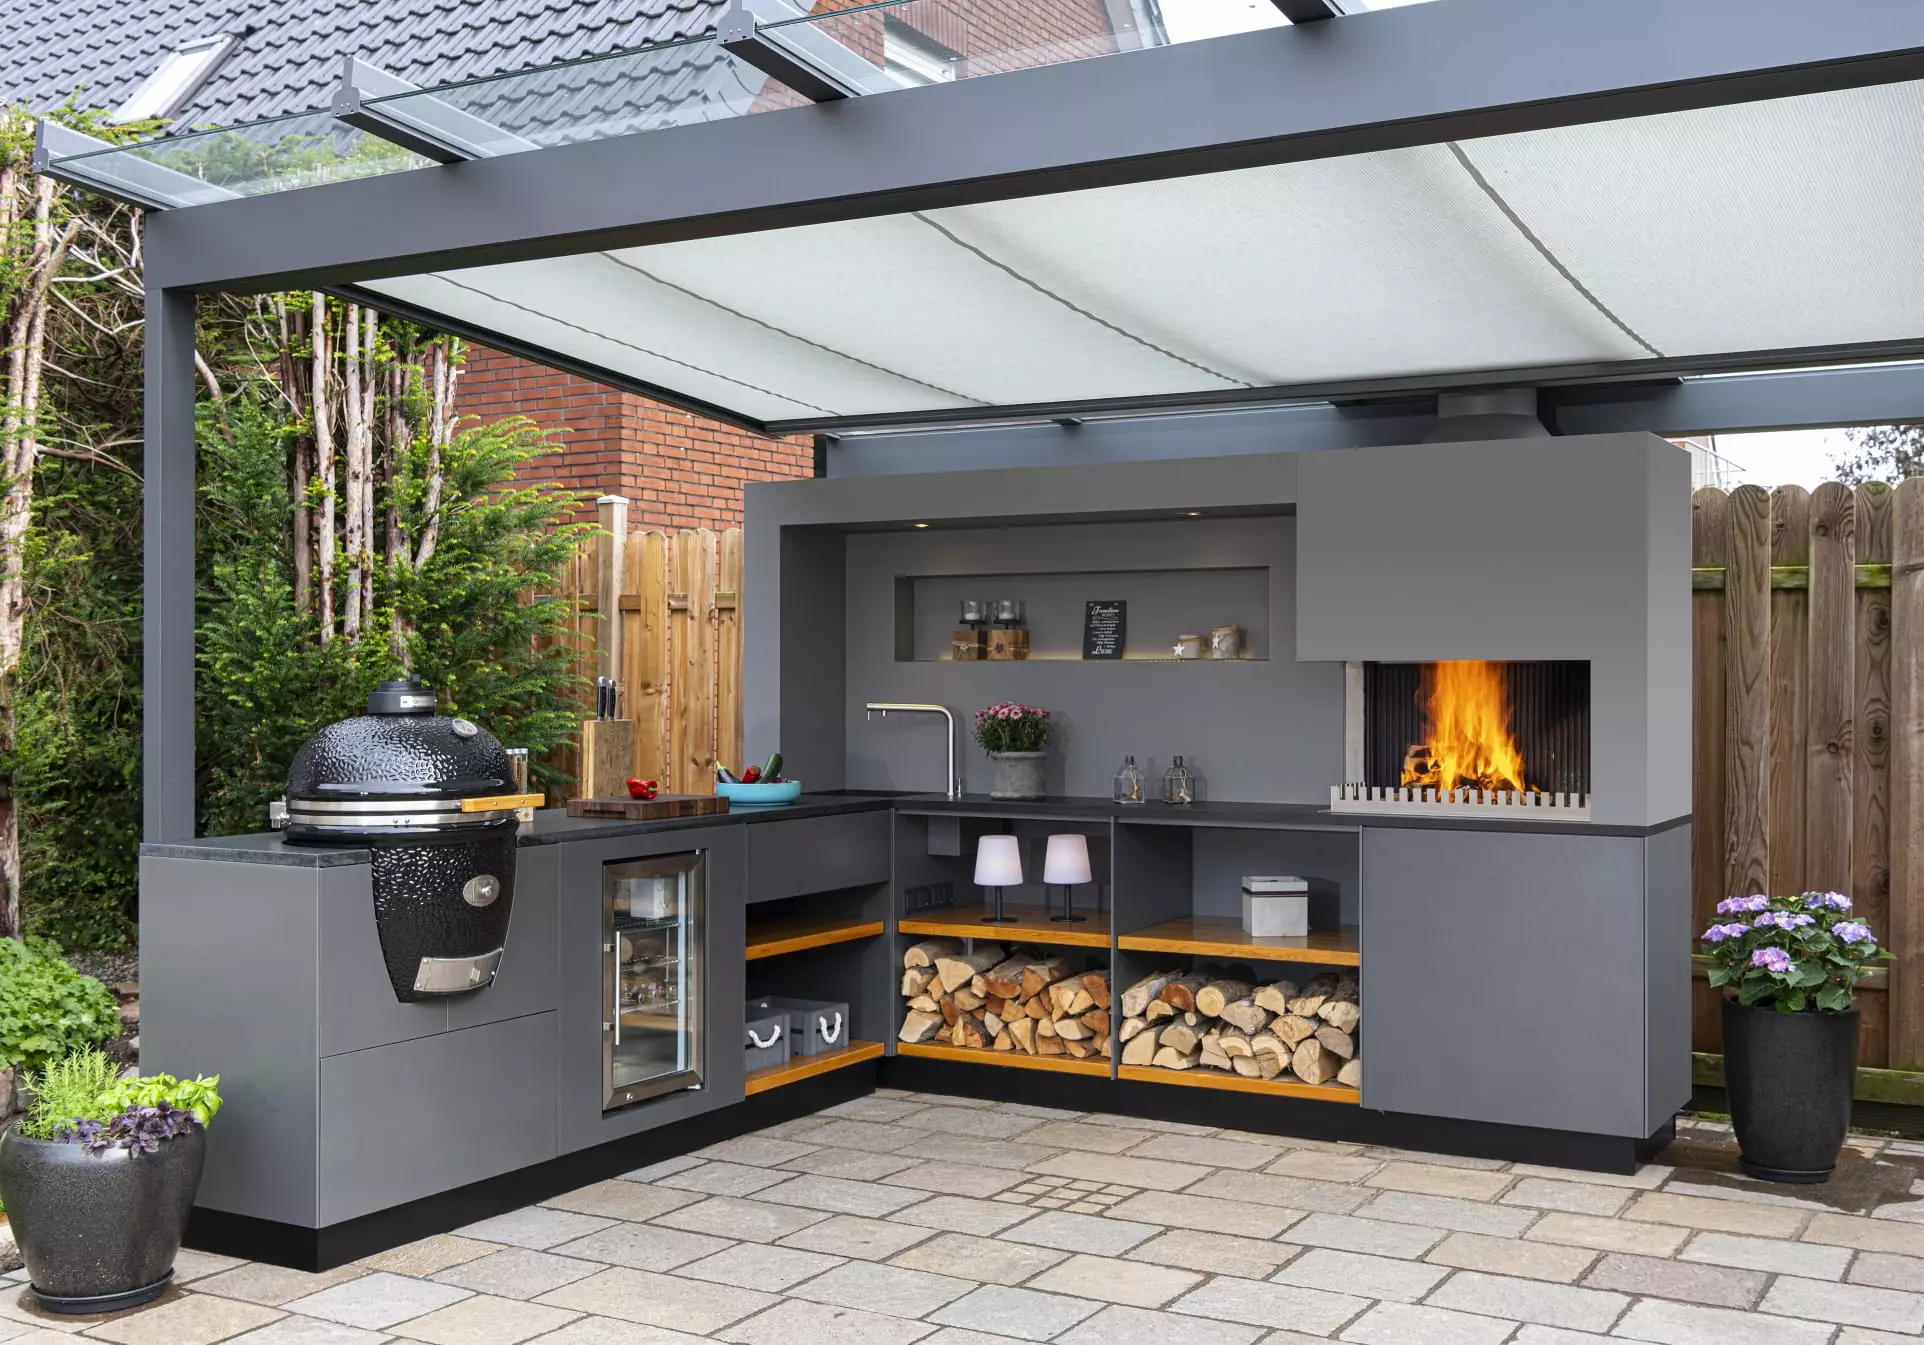 What Do You Need To Make A Great Outdoor Kitchen